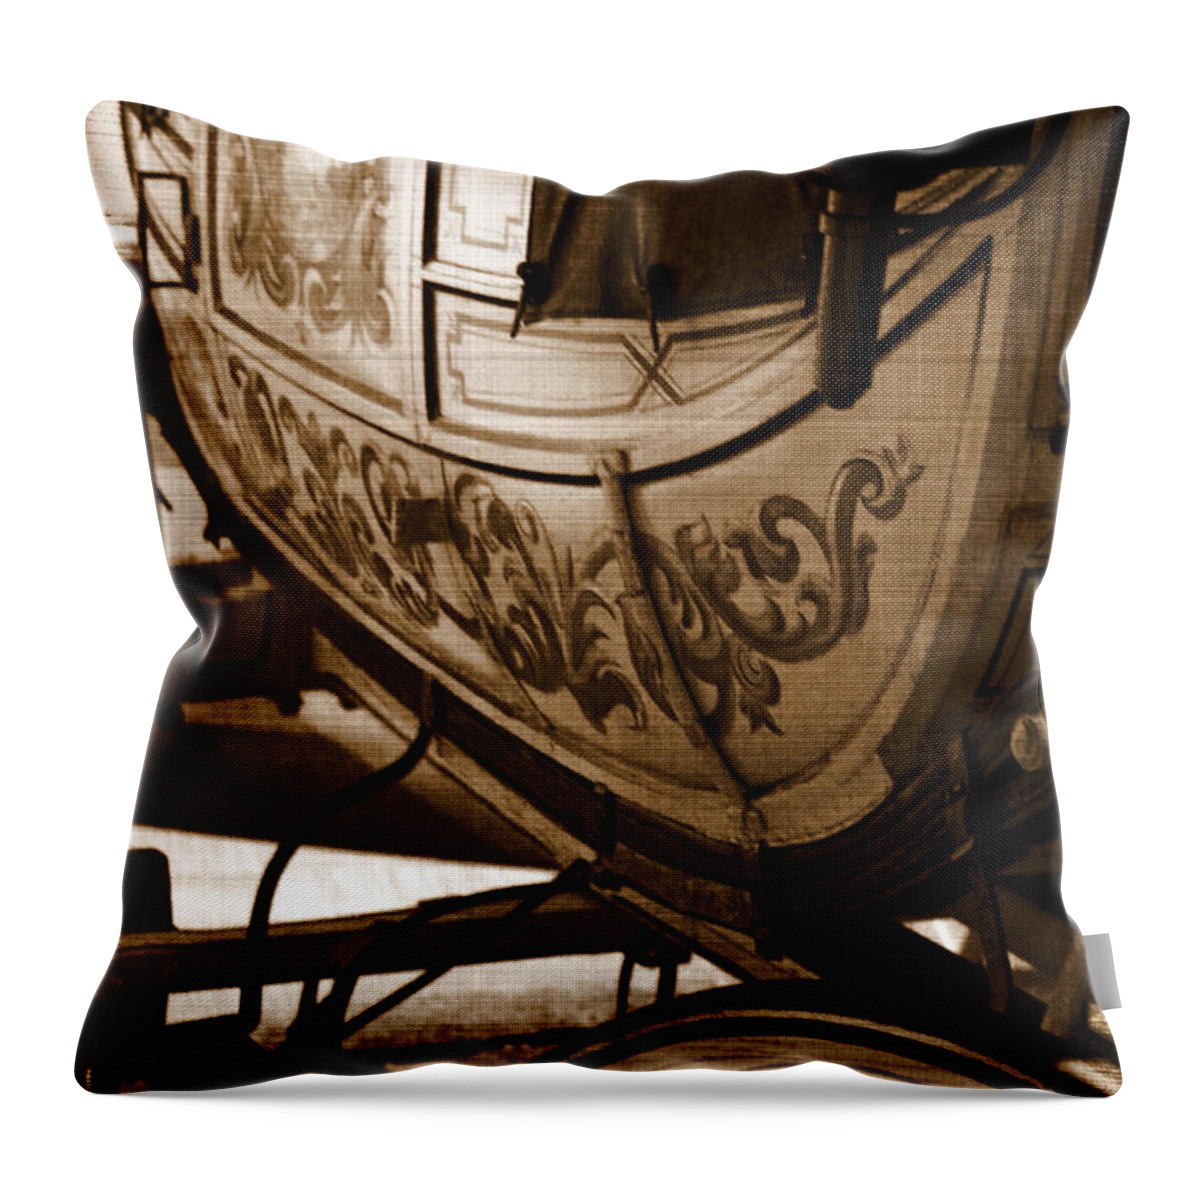 Antique Carrige Throw Pillow featuring the photograph Antique Carrige by Robert Meanor